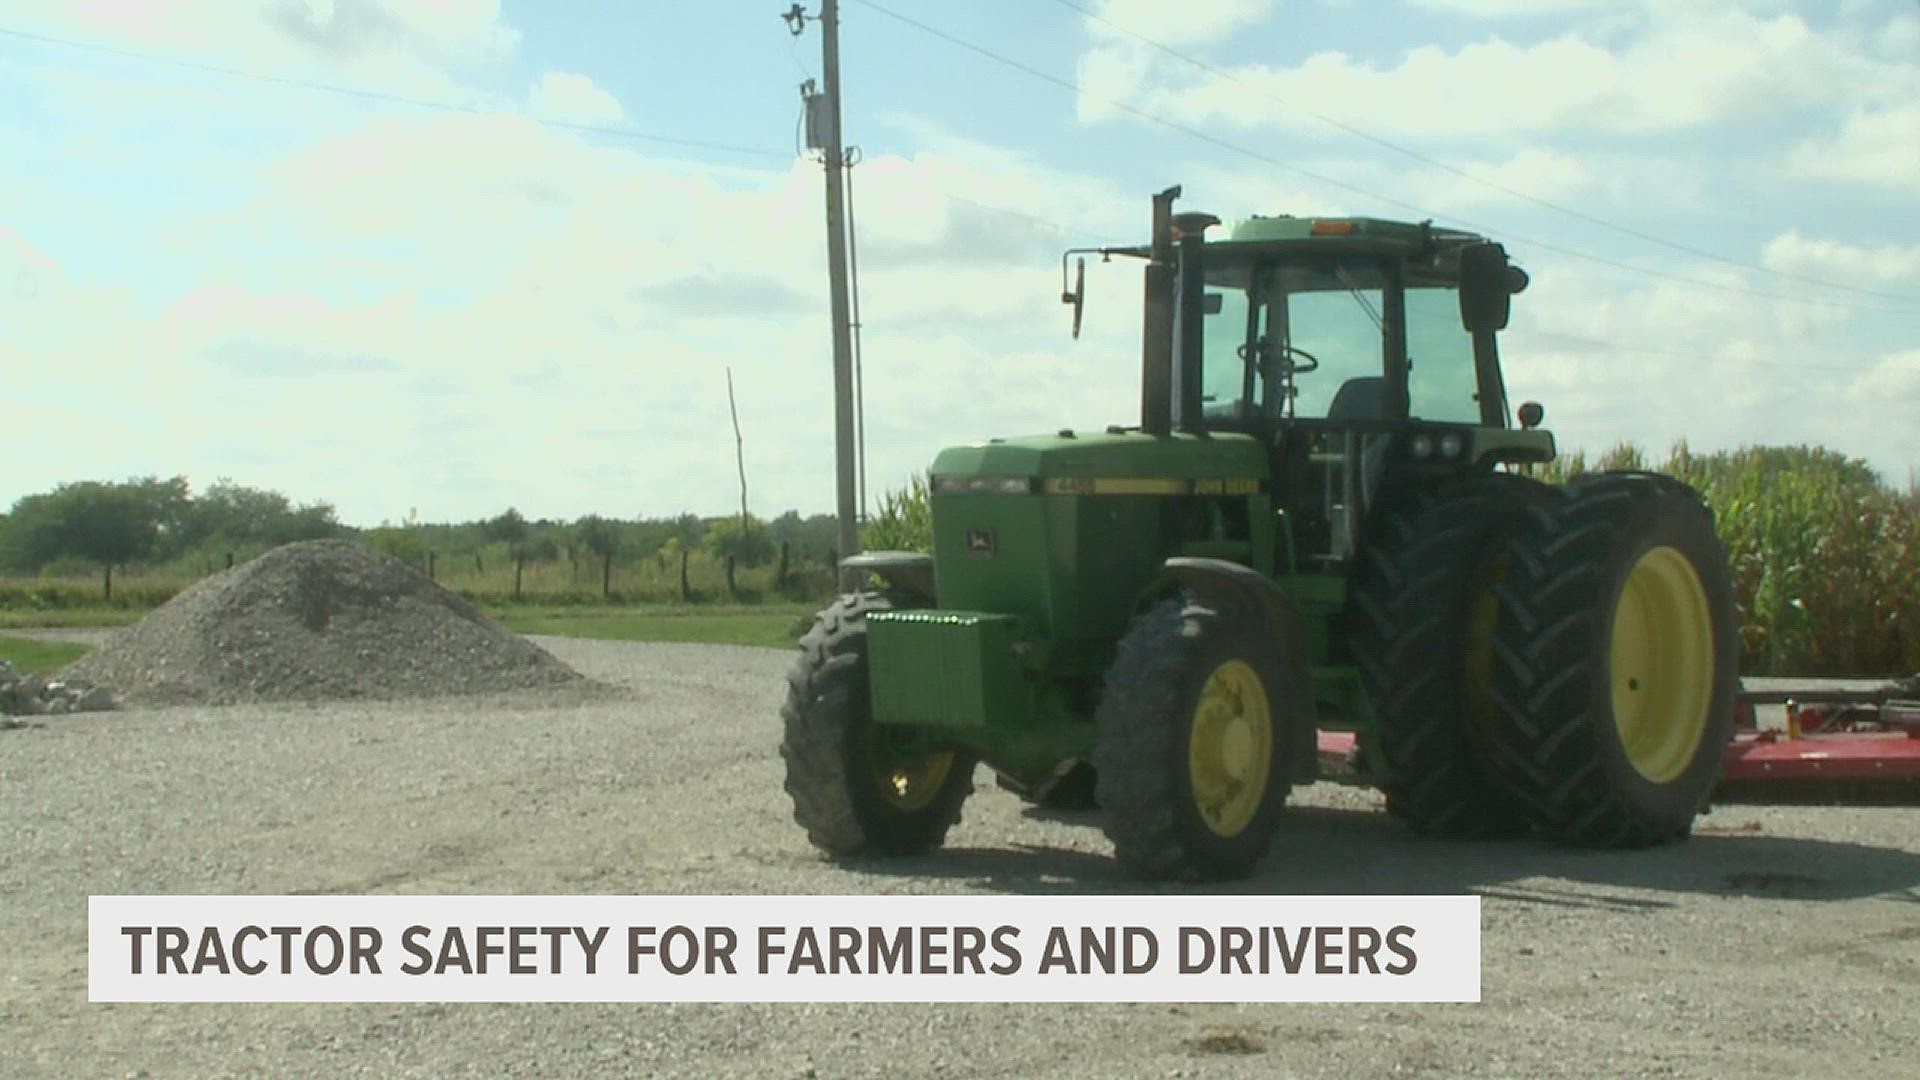 Industry leaders want farmers and drivers to be aware of tractor safety, both in rollover and traffic dangers.